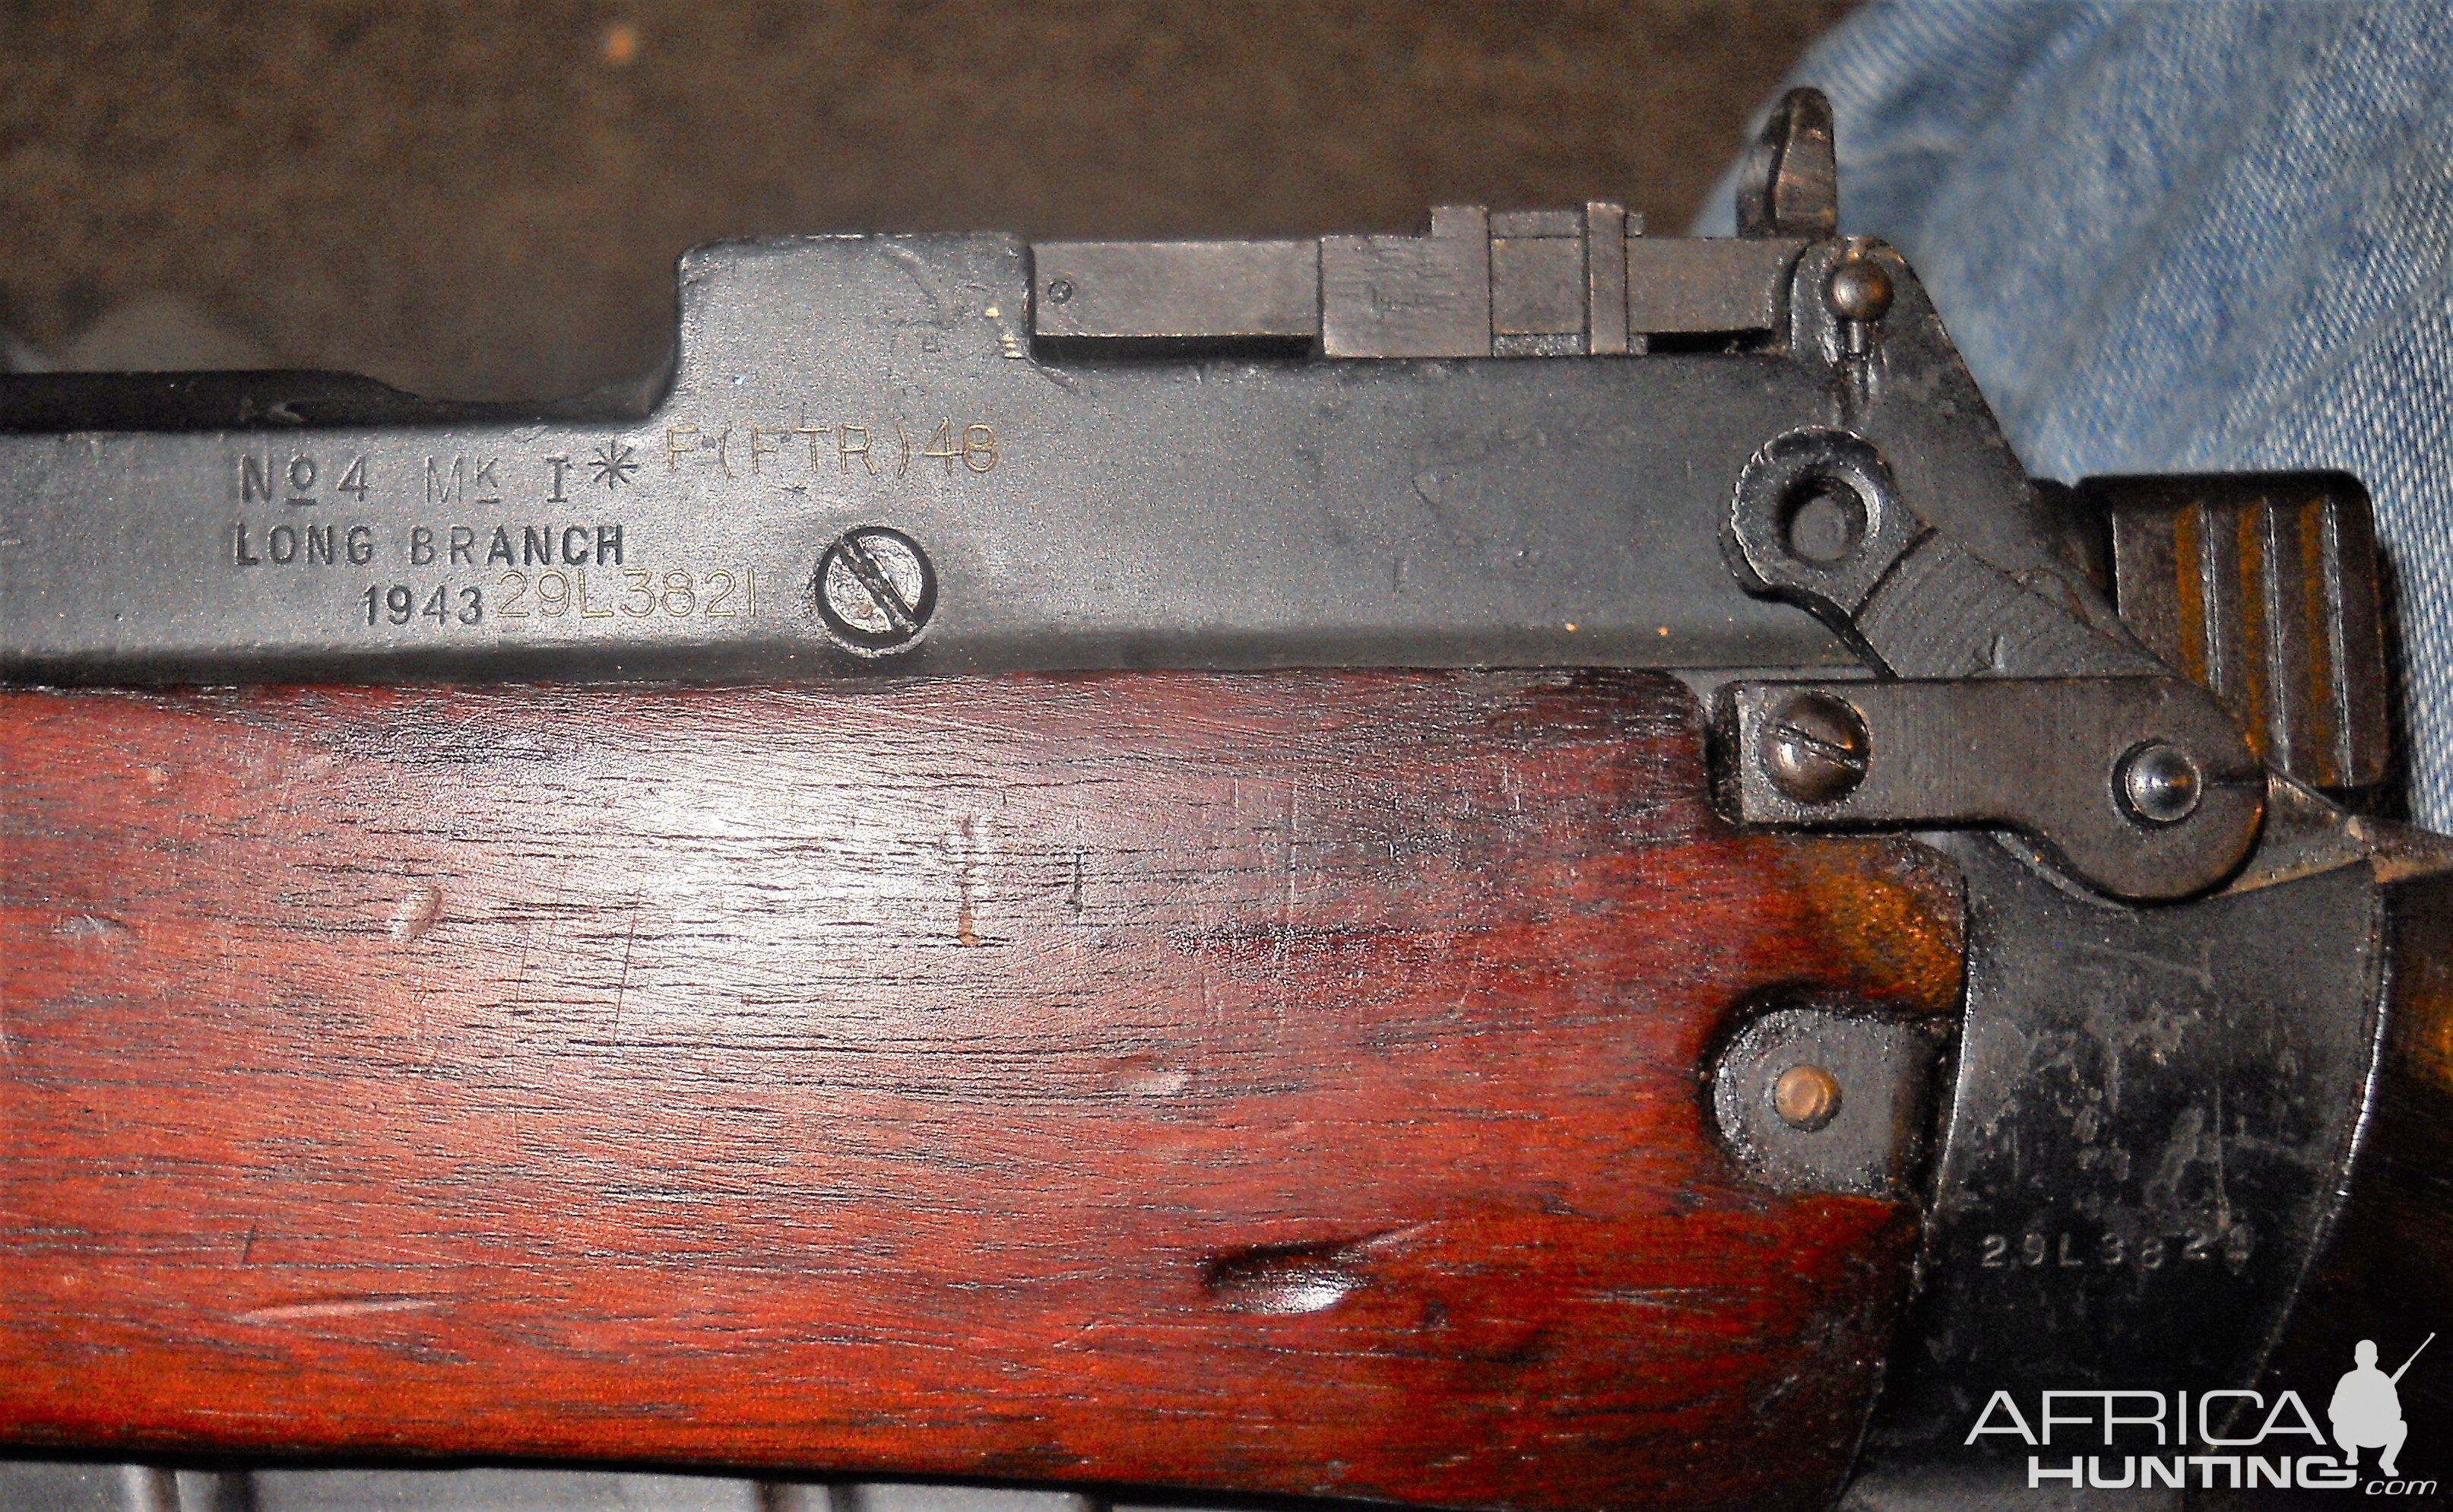 https://www.africahunting.com/media/303-lee-enfield-rifle.79355/full